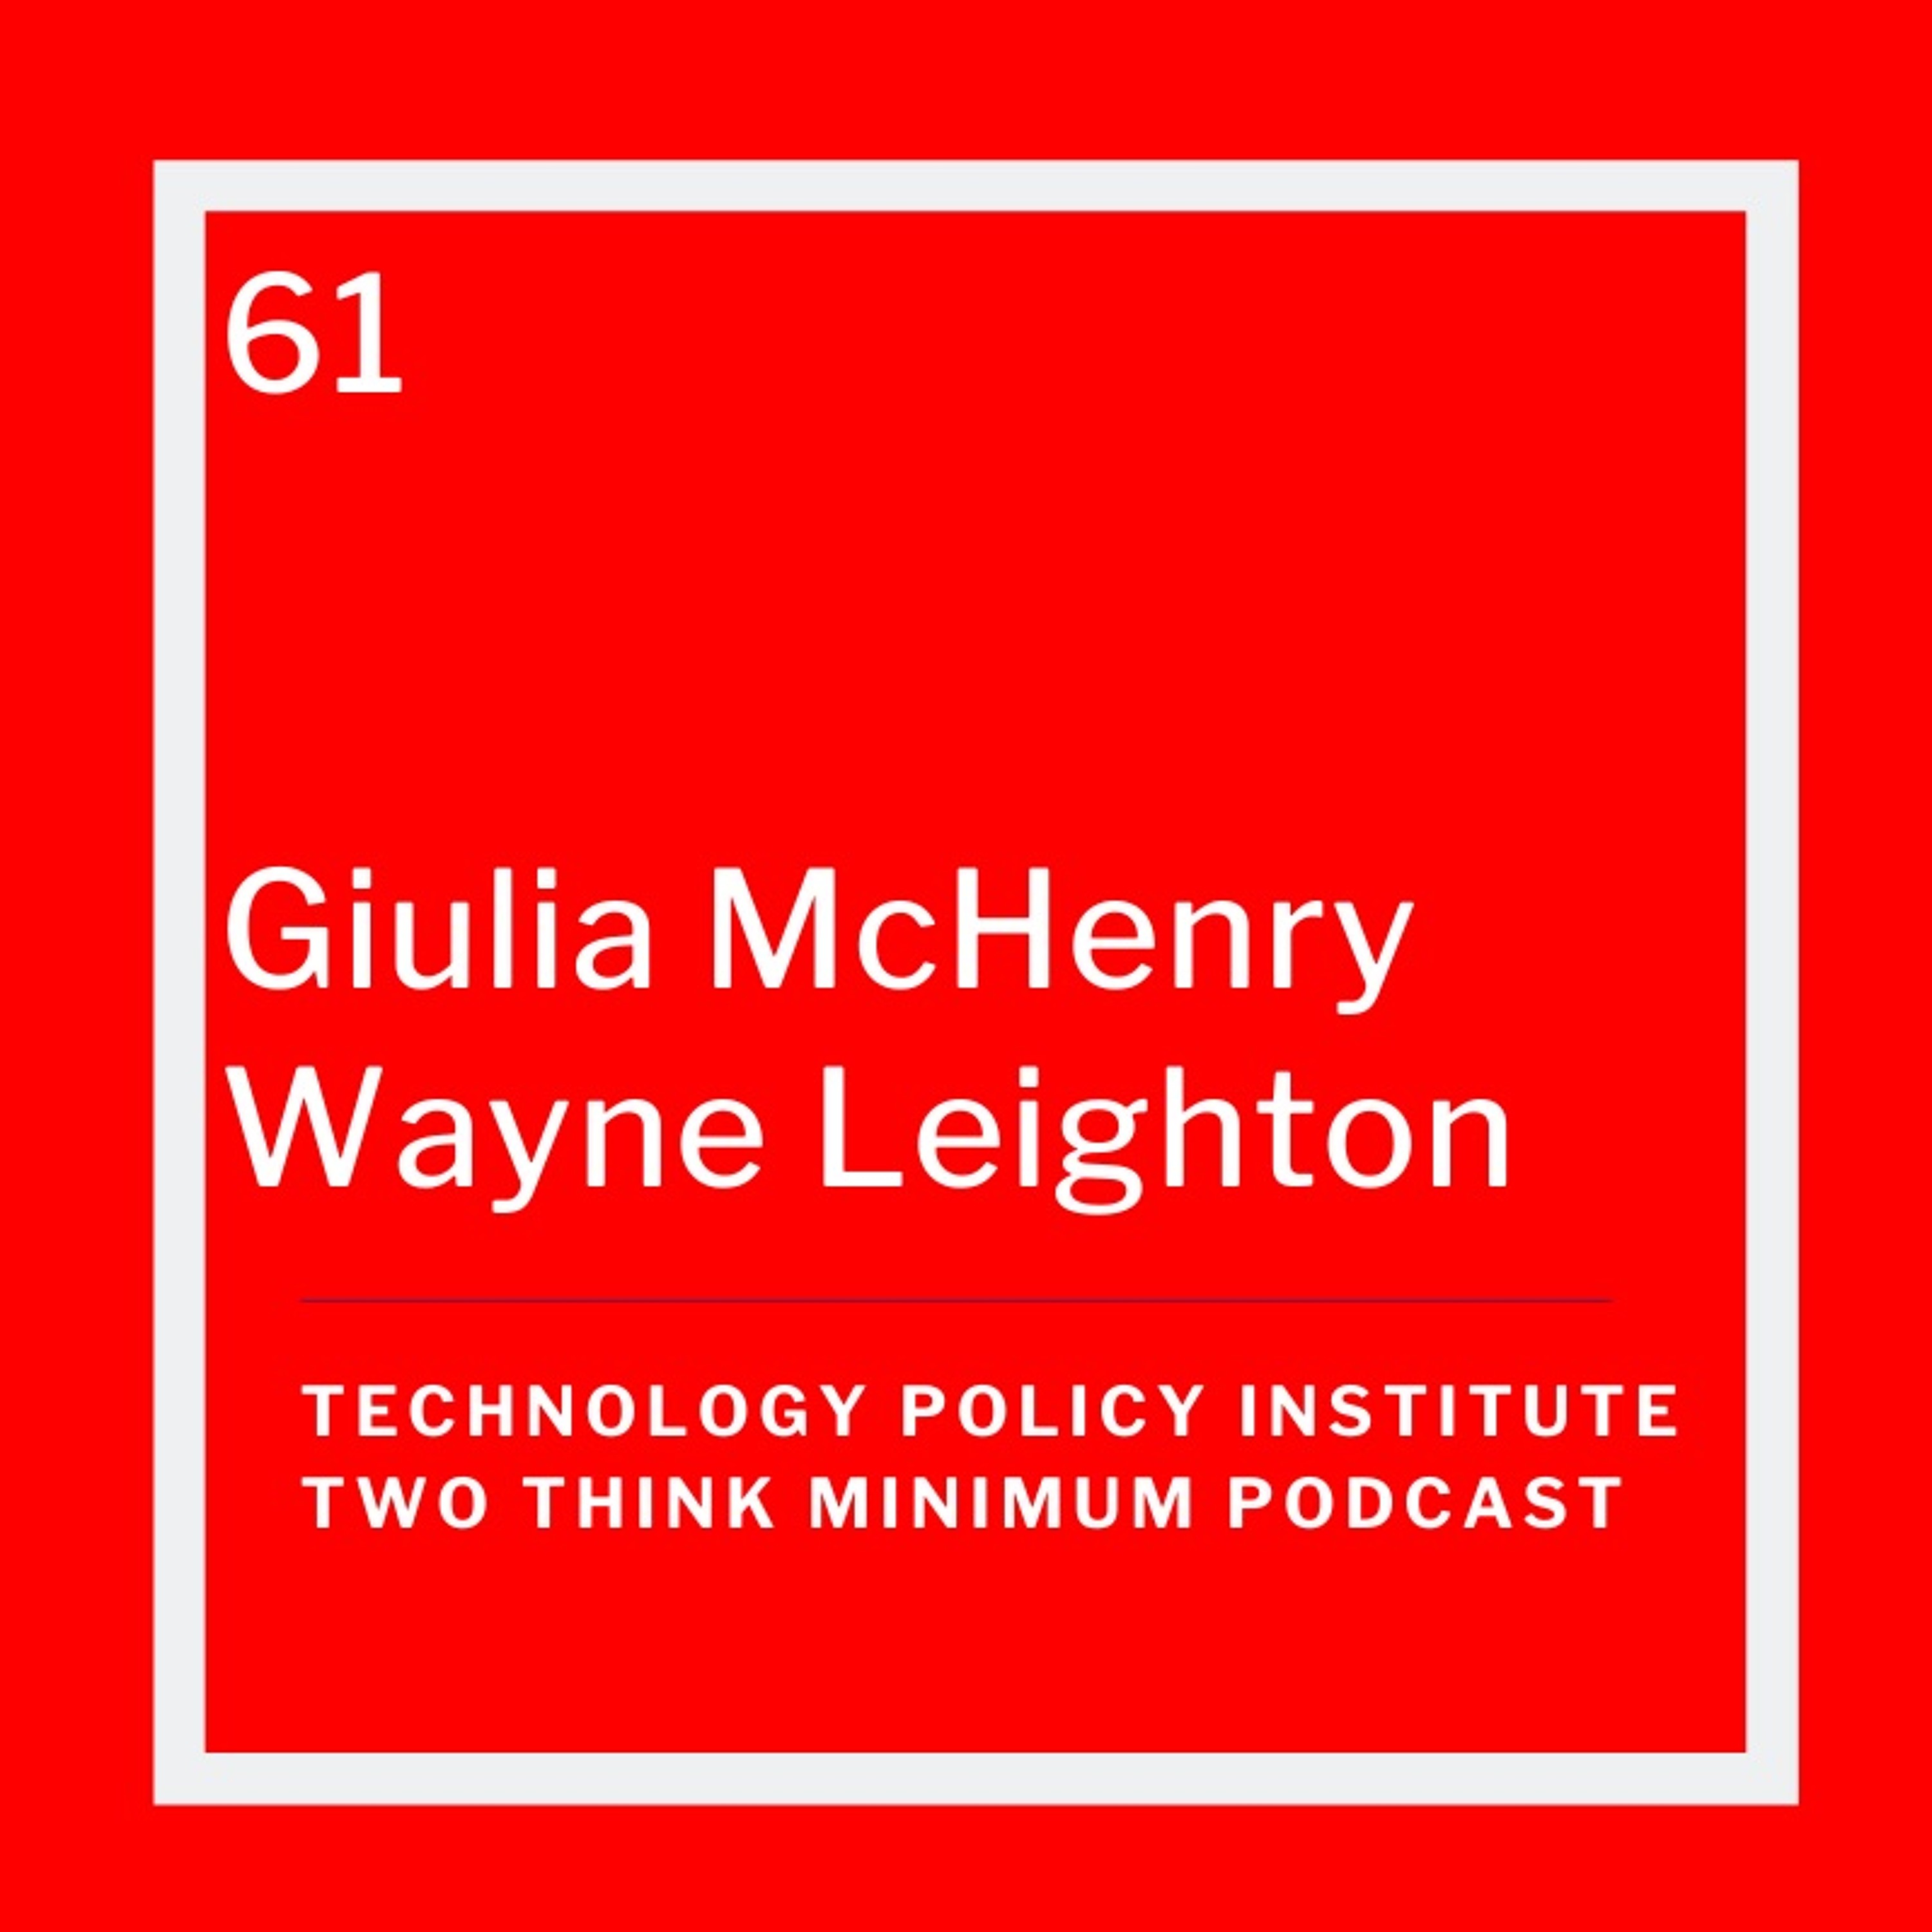 Giulia McHenry and Wayne Leighton on the FCC's Office of Economics and Analytics